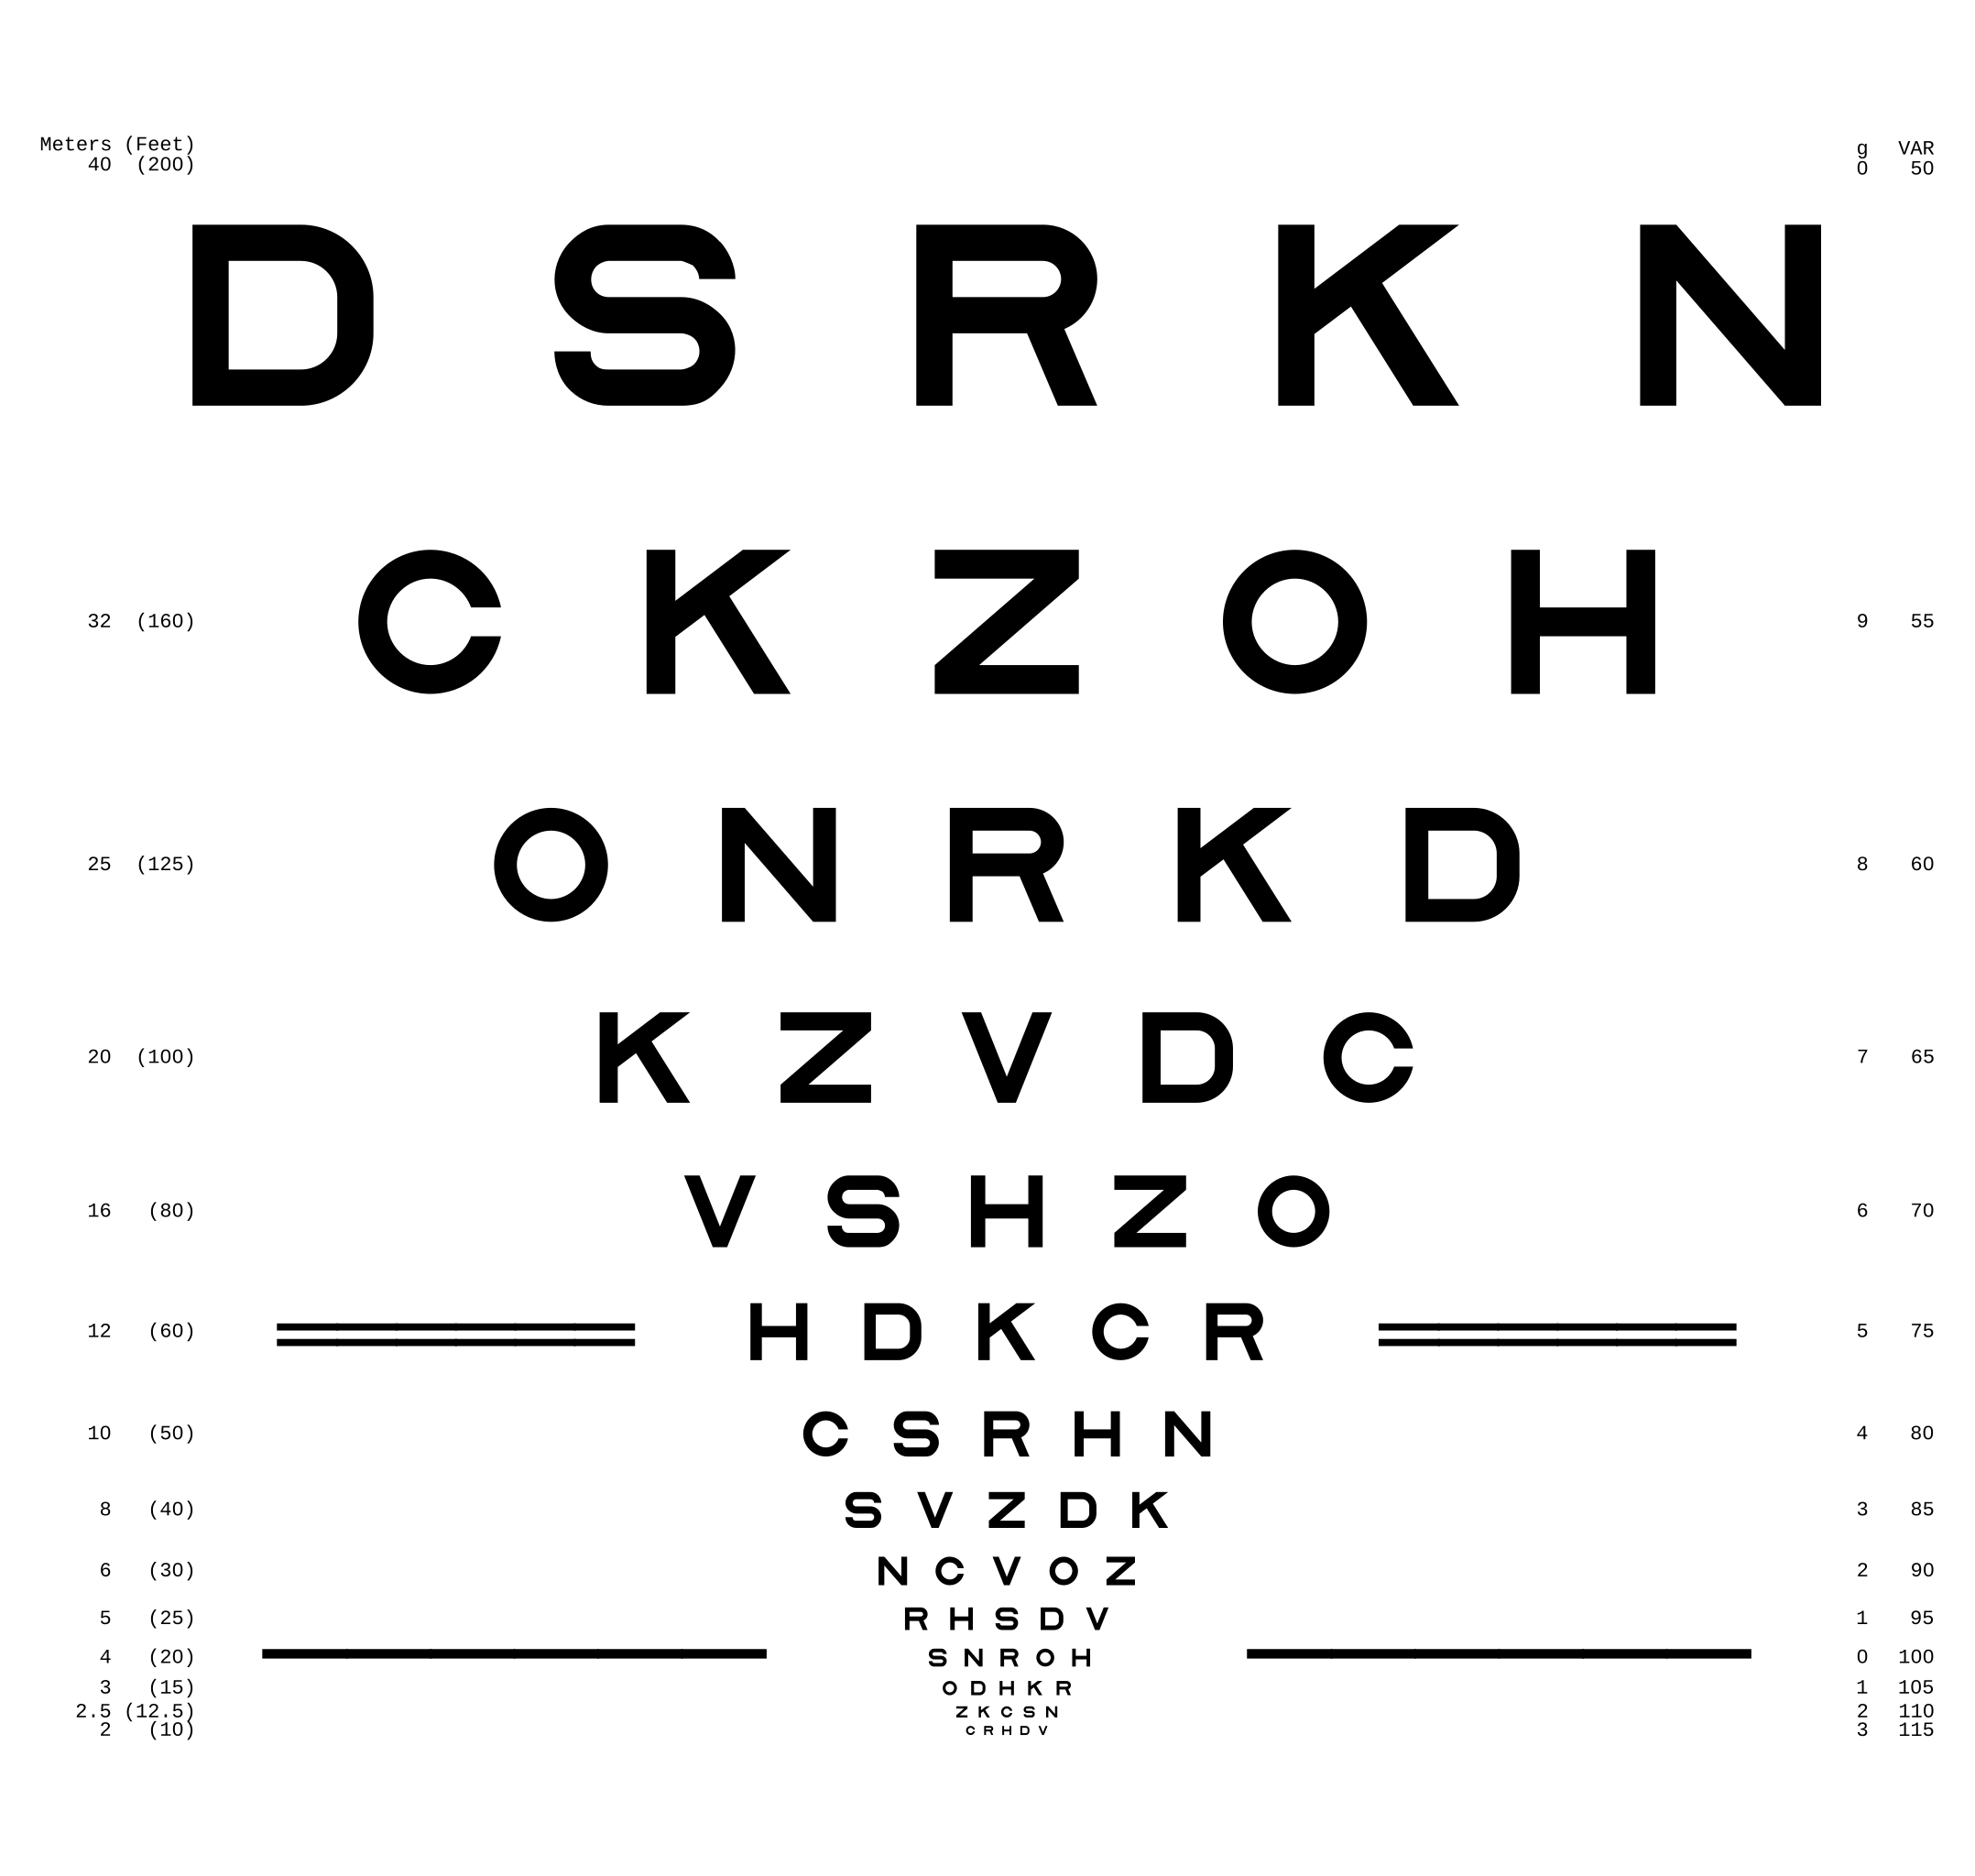 Difference Between Snellen and Sloan Eye Chart